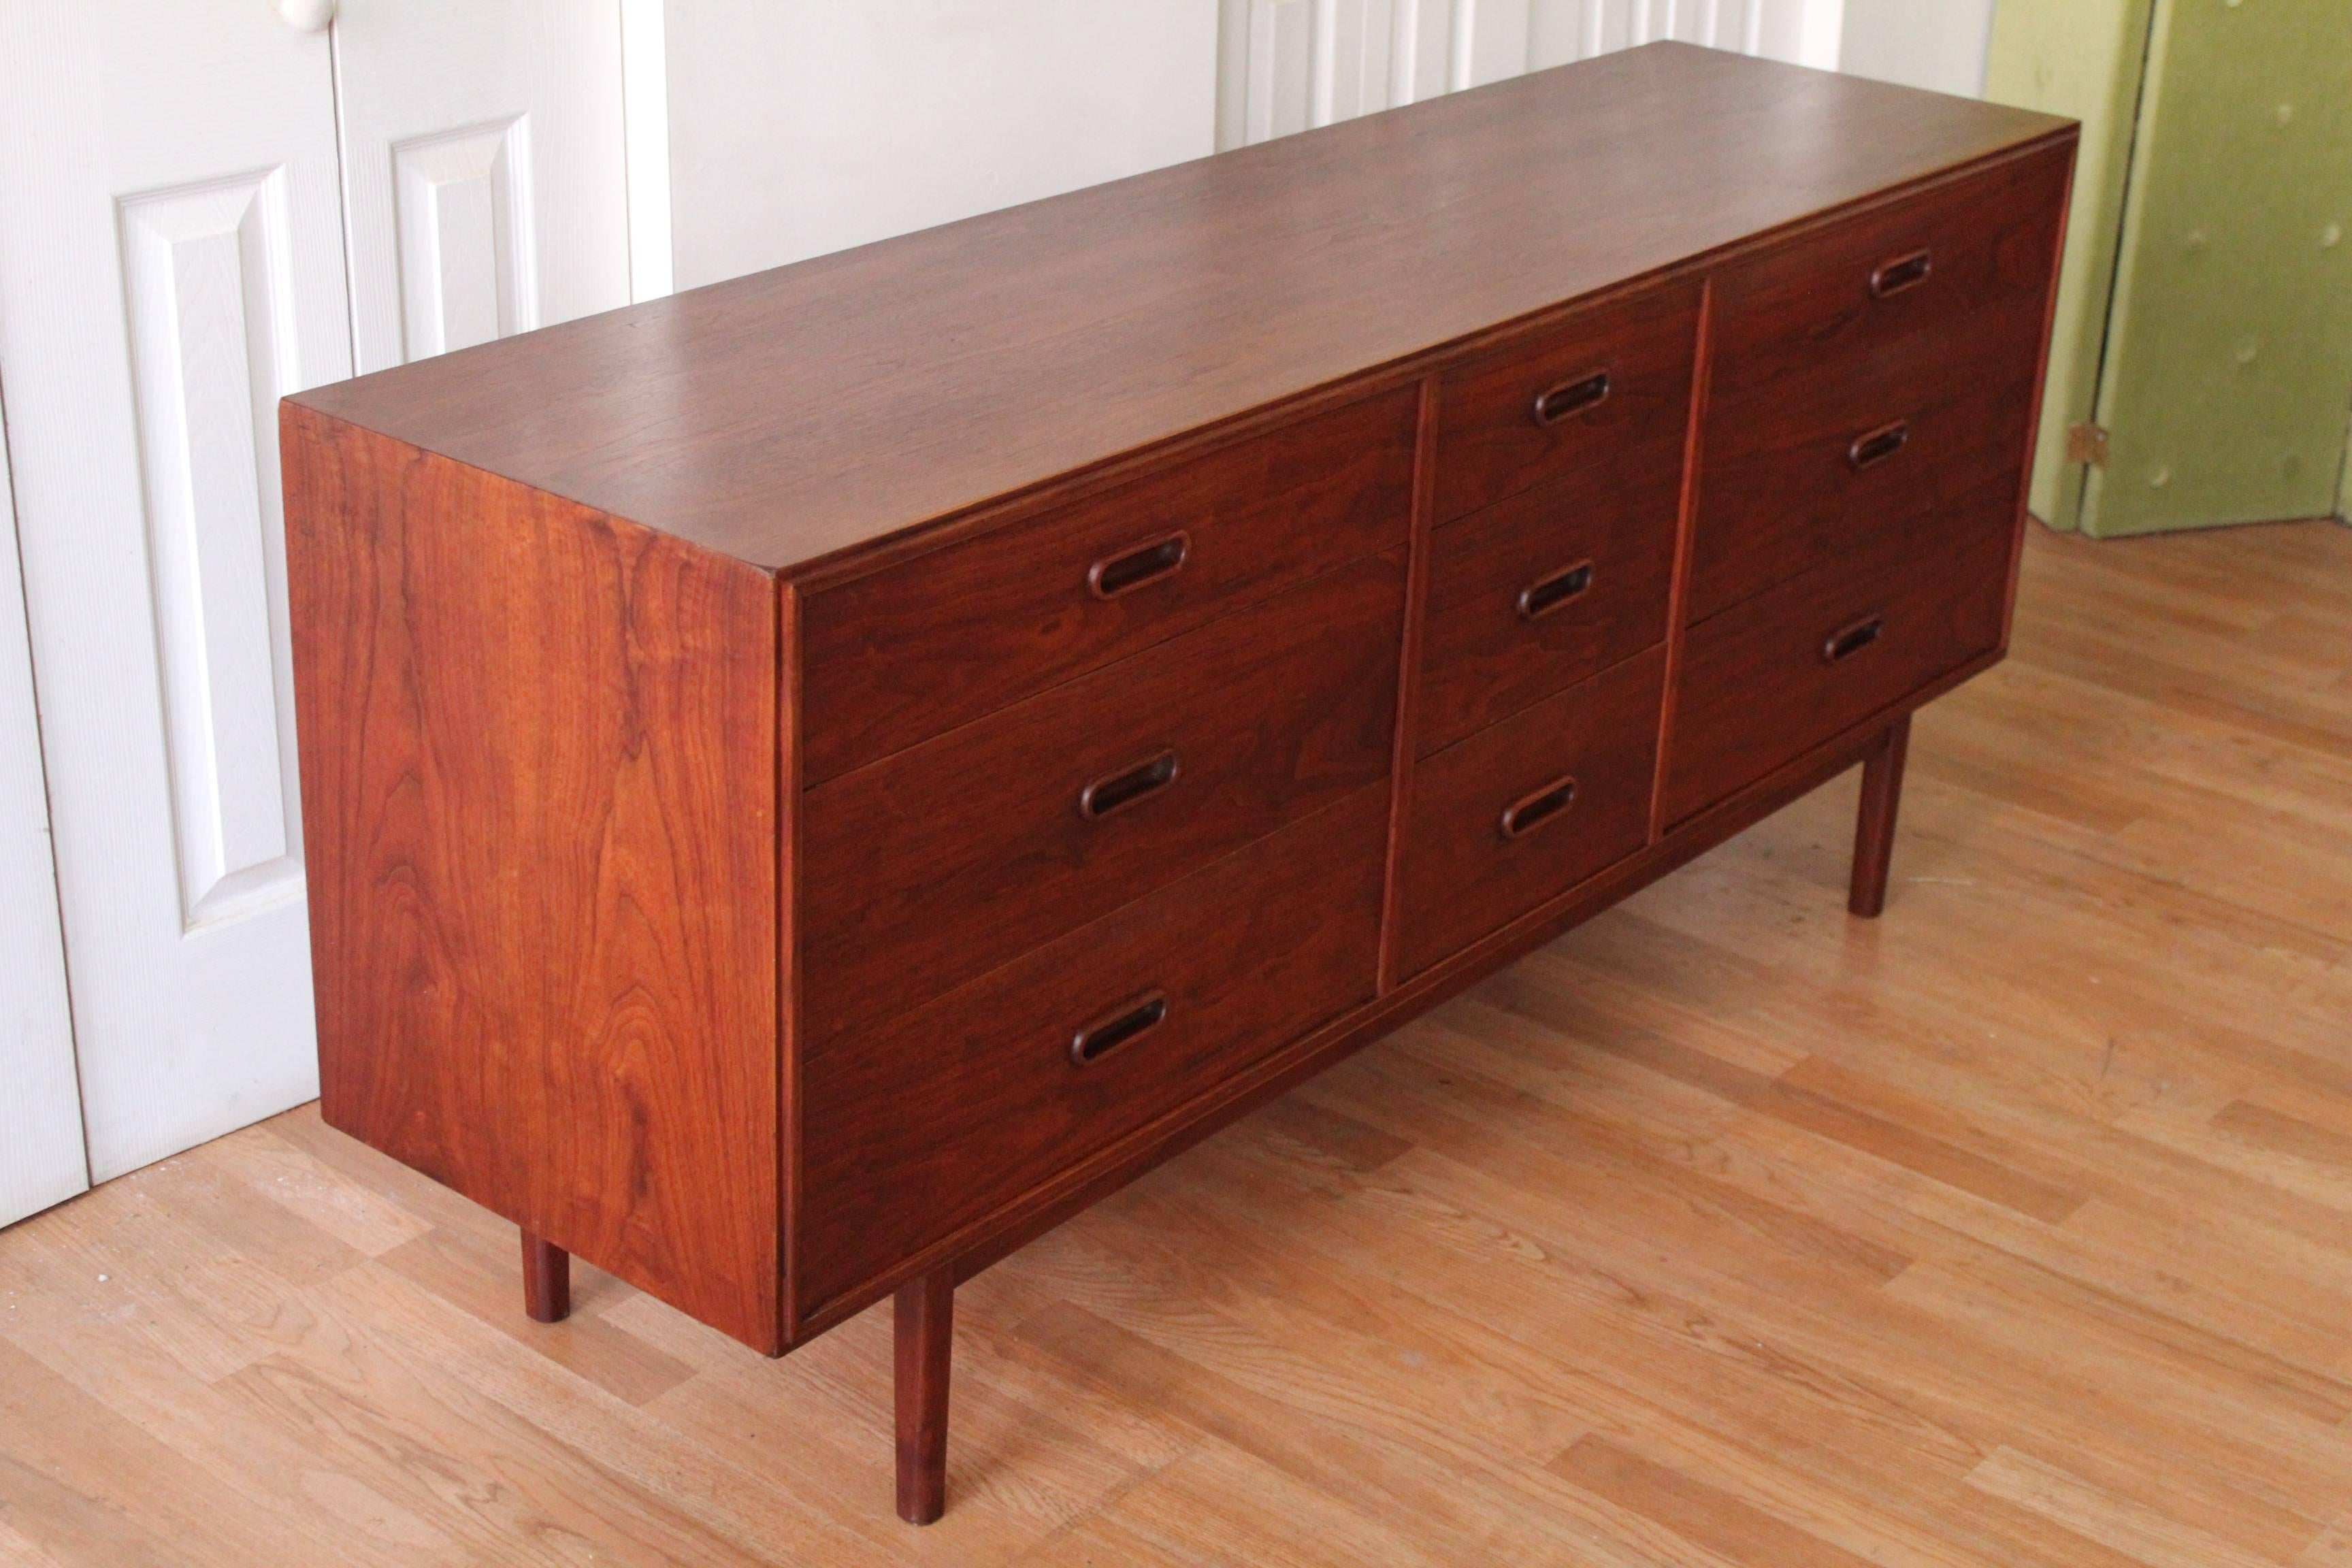 Mid-20th Century Walnut Mid-Century Modern Dresser by Jack Cartwright for Founders